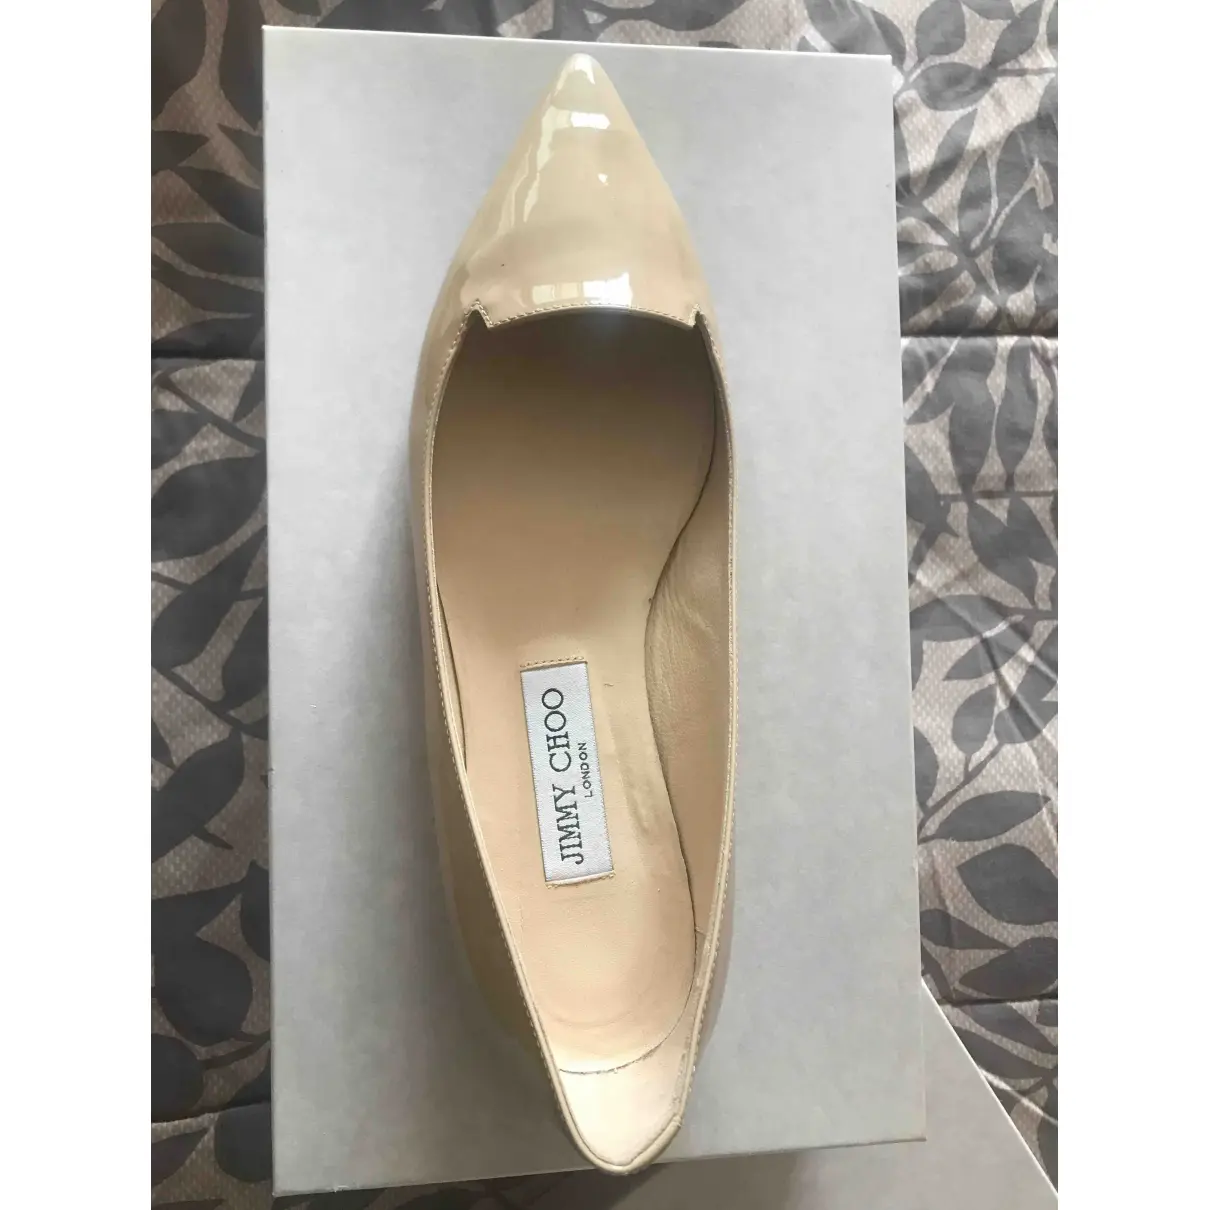 Buy Jimmy Choo Patent leather ballet flats online